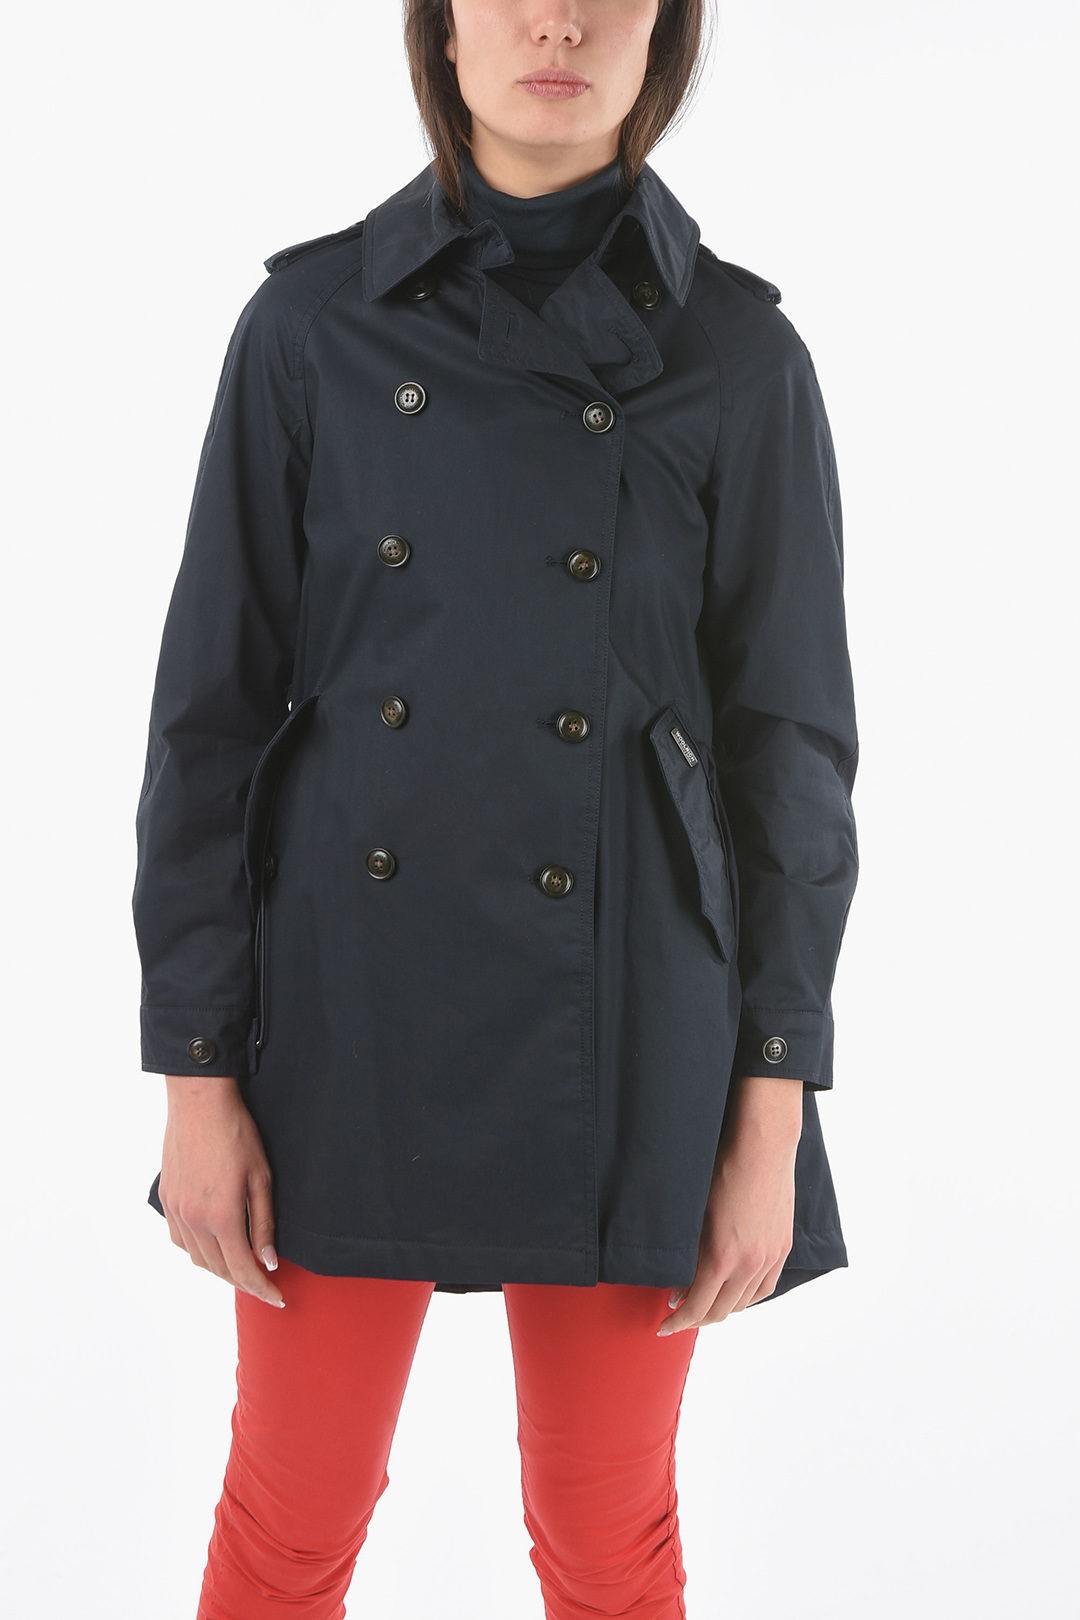 WOOLRICH ウールリッチ コート COWWCPS2567LM10 300 レディース SOLID COLOR DOUBLE BREASTED TRENCH ..